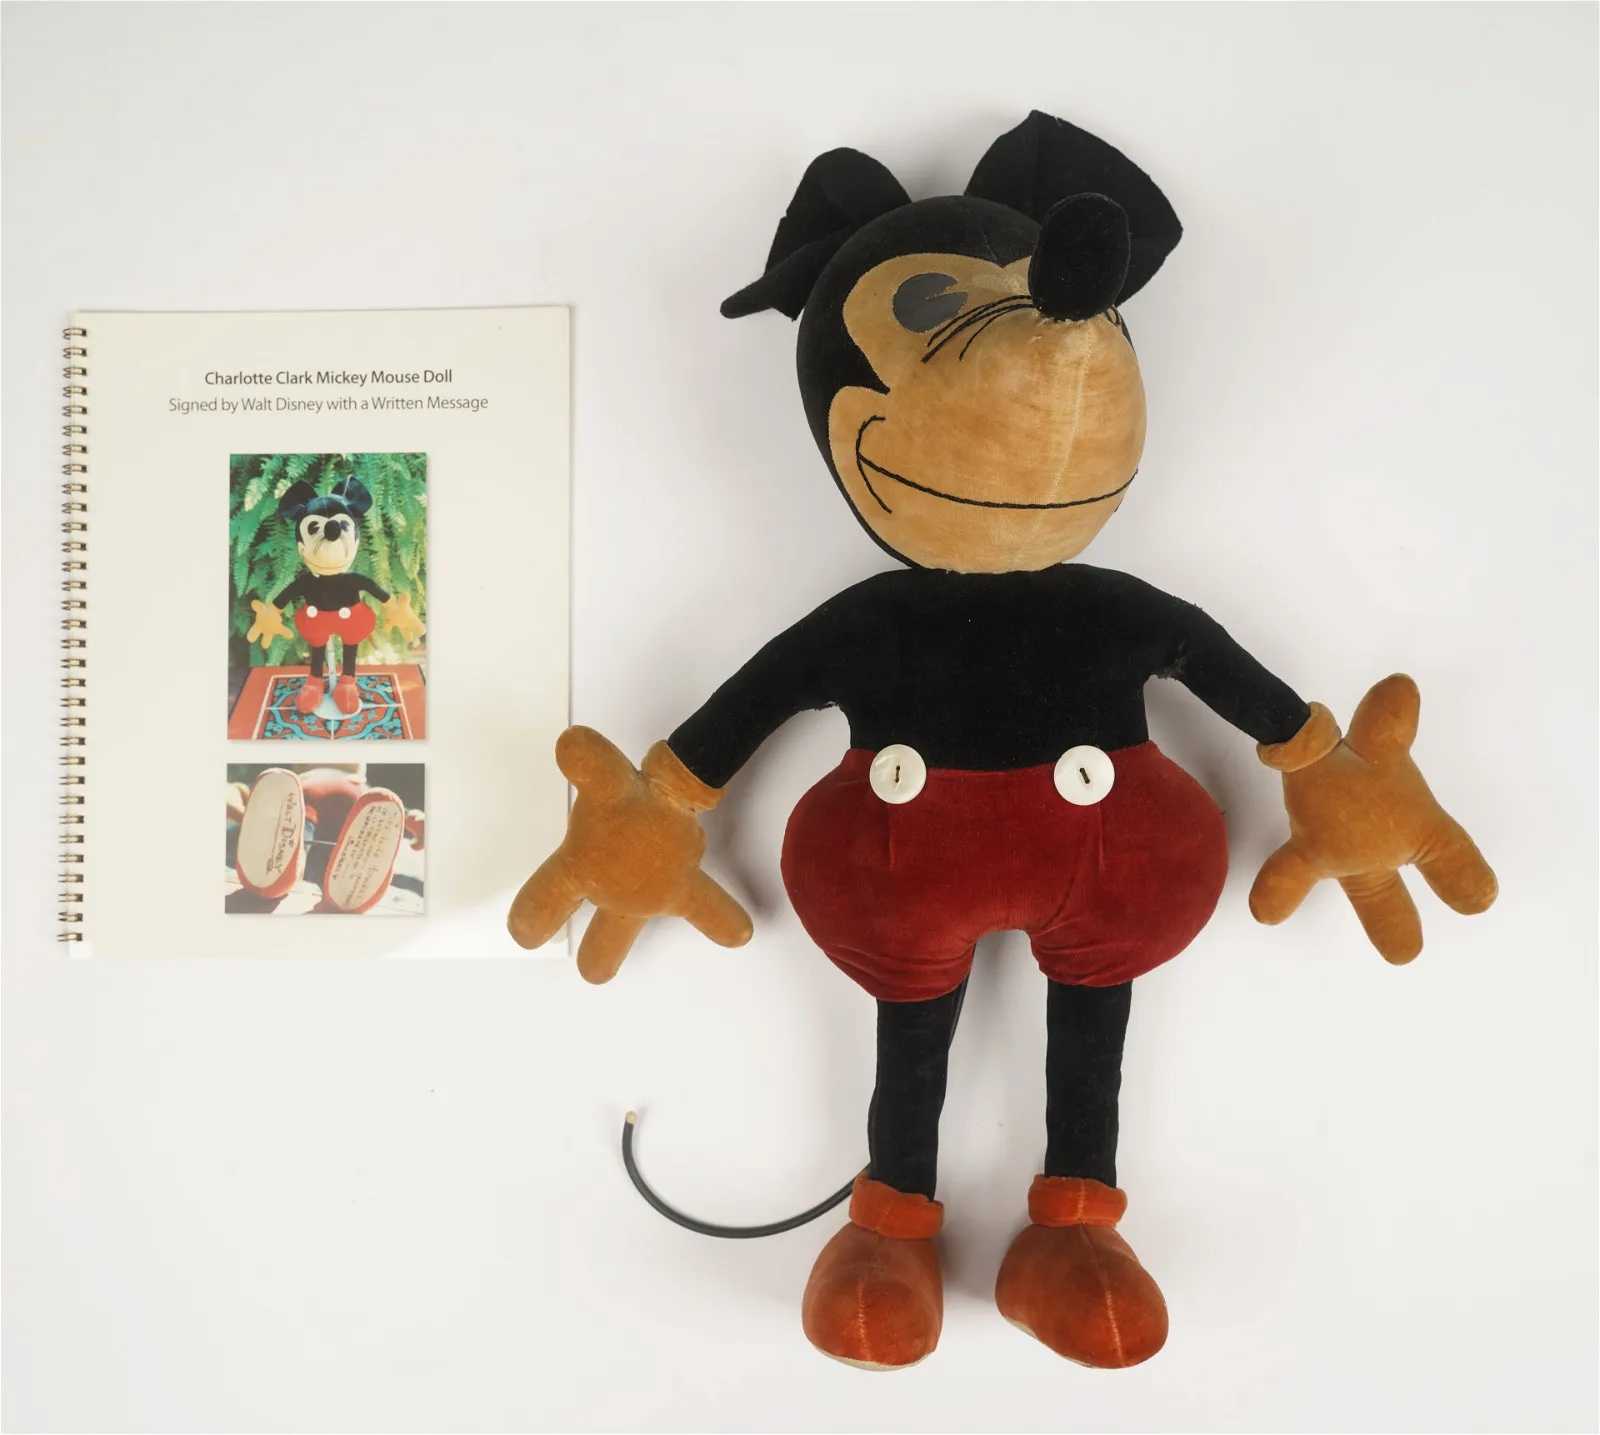 Walt Disney-signed Charlotte Clark Mickey Mouse plush doll, estimated at $6,000-$8,000 at Abell.